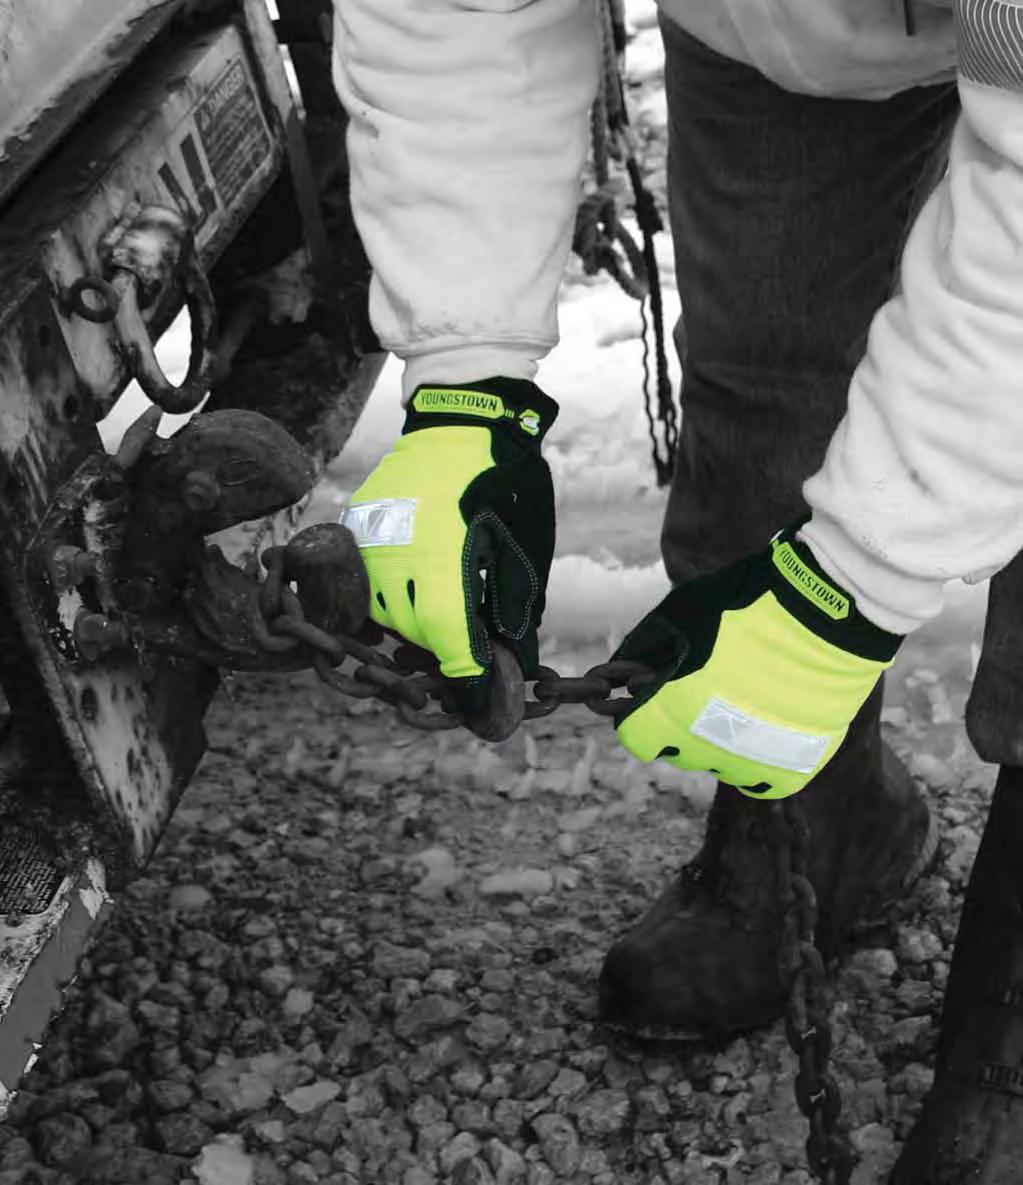 high-visibility series Youngstown s High-Visibility gloves are designed for durability and dexterity in applications where visibility is a must.